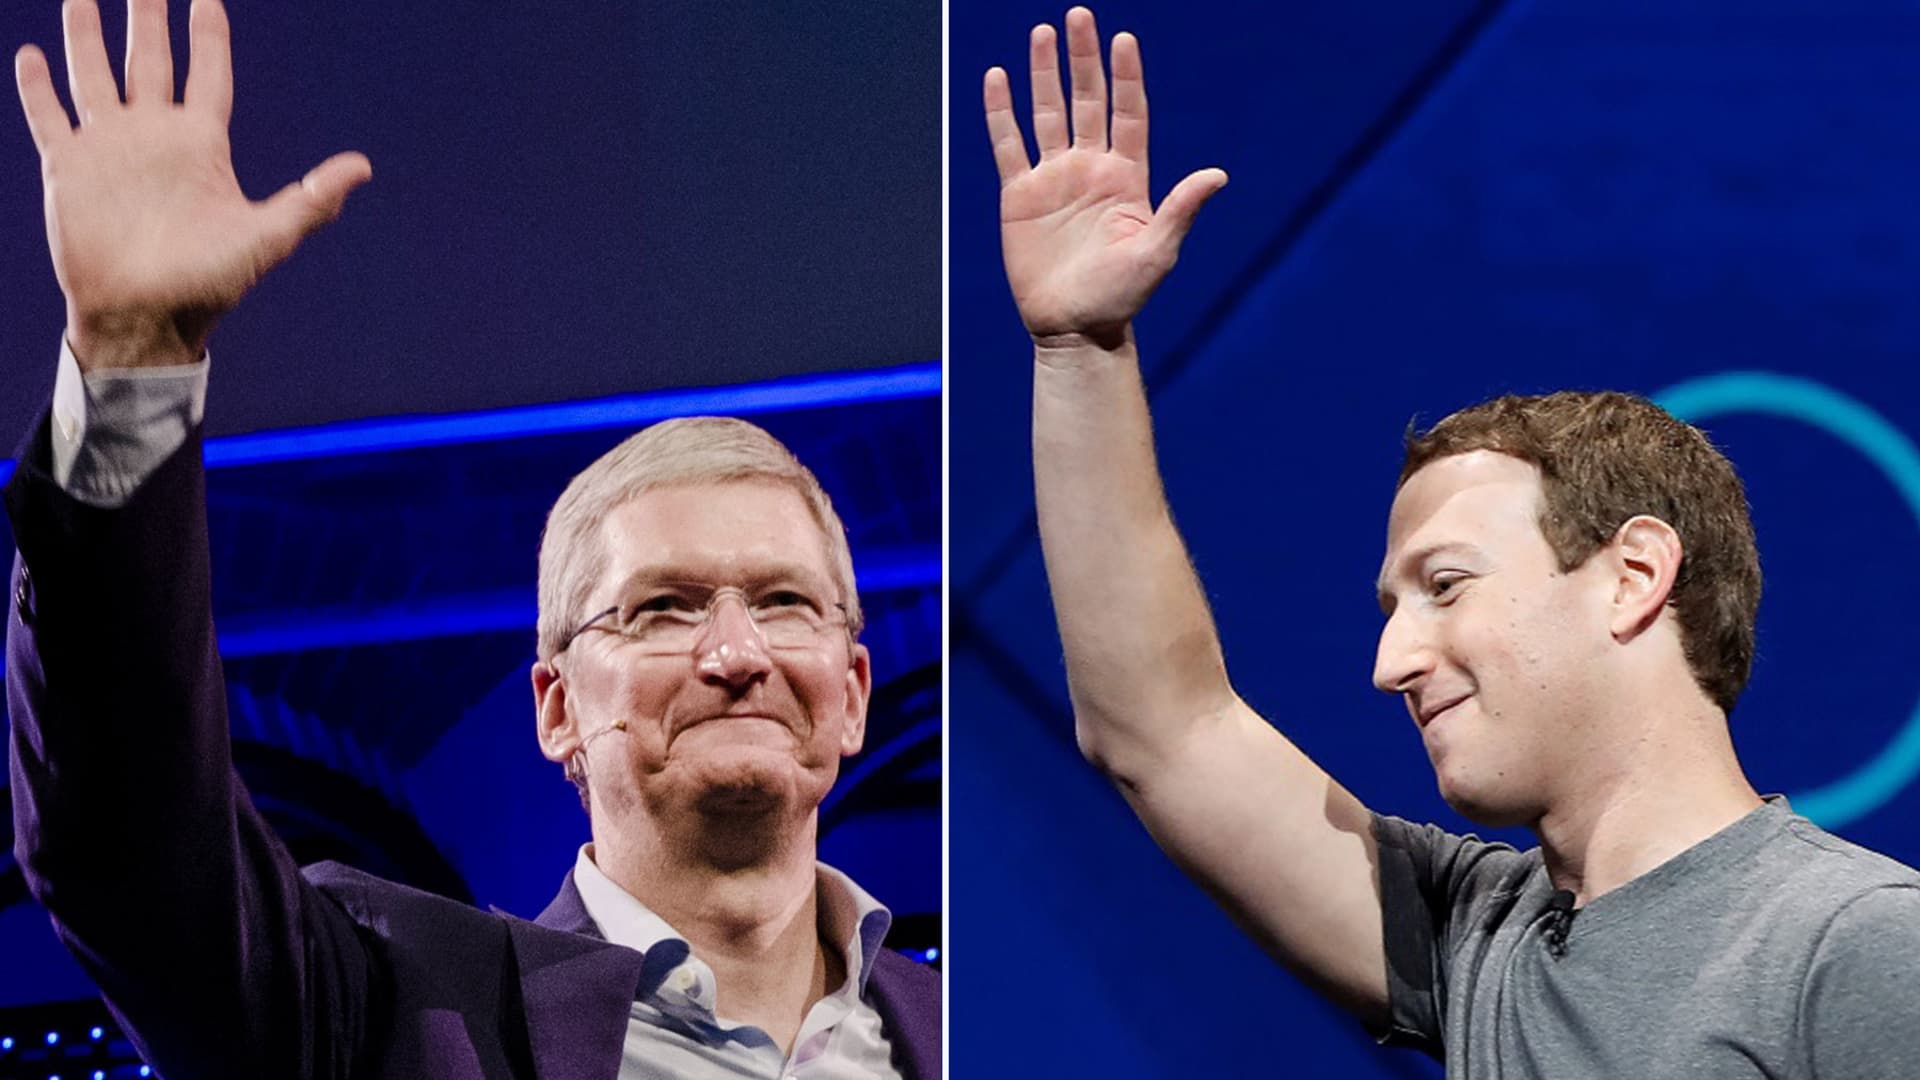 Mark Zuckerberg says Apple is now one of Facebook's biggest competitors